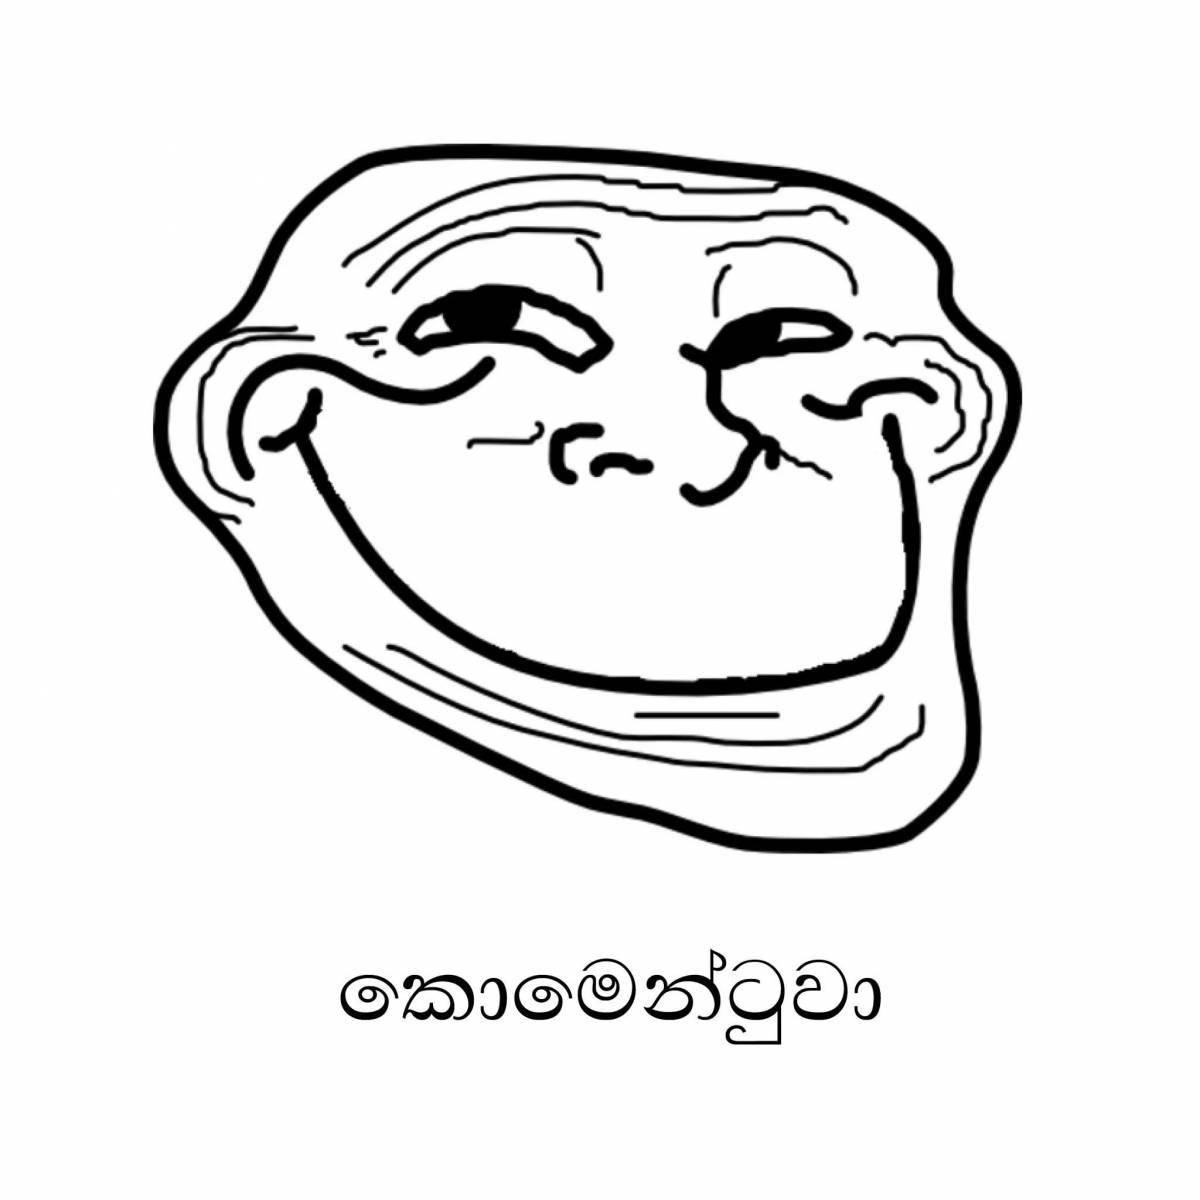 Exciting troll face coloring page